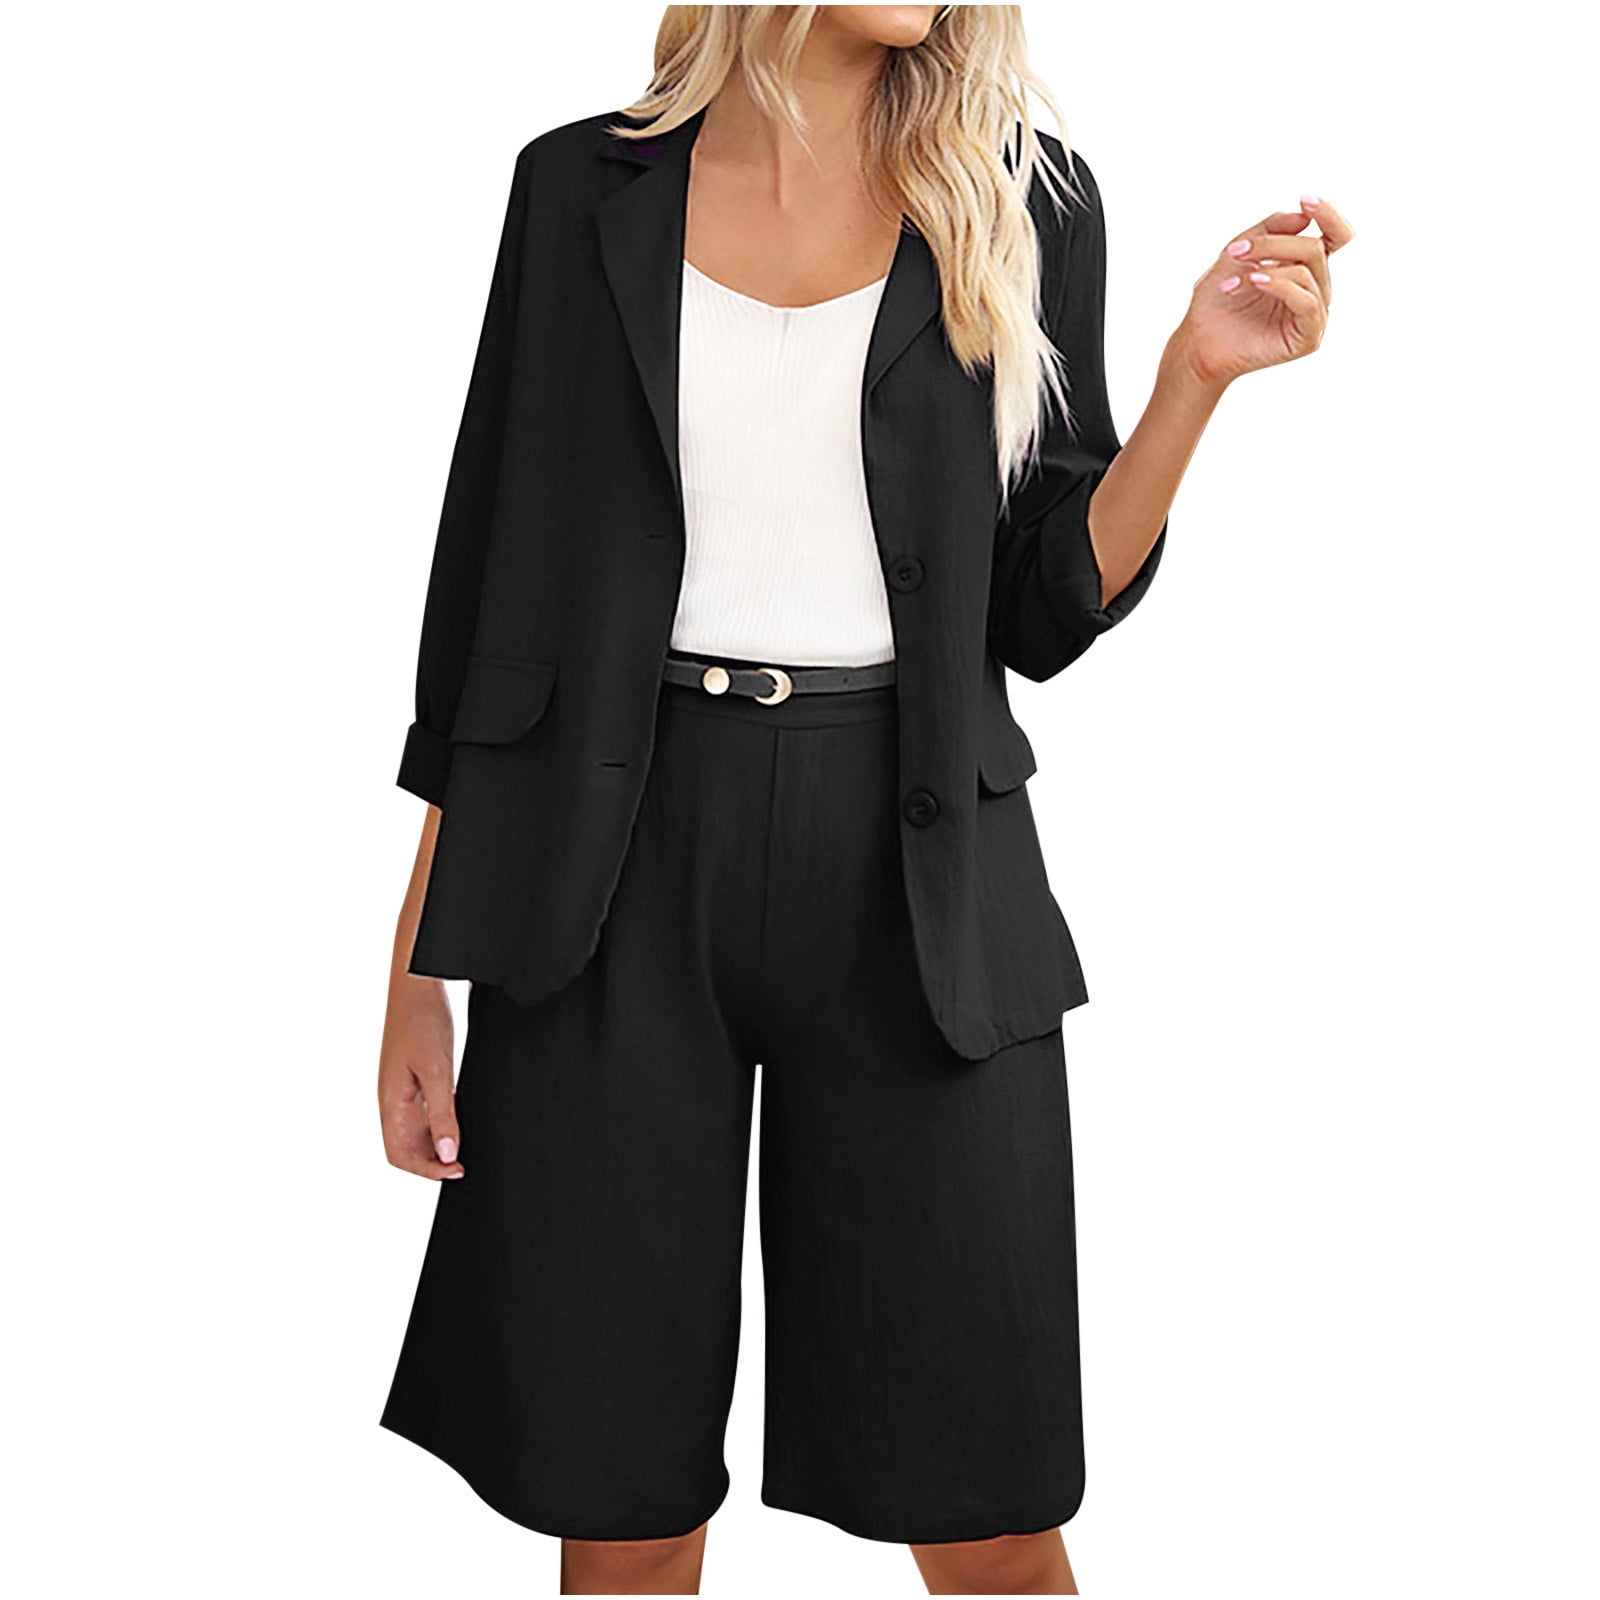 REORIAFEE Womens Country Concert Outfits Going out Outfits Women's Turndown  Collar Long Sleeve Pullover Shirt Tops + Pants Trousers Set Black XXXL 